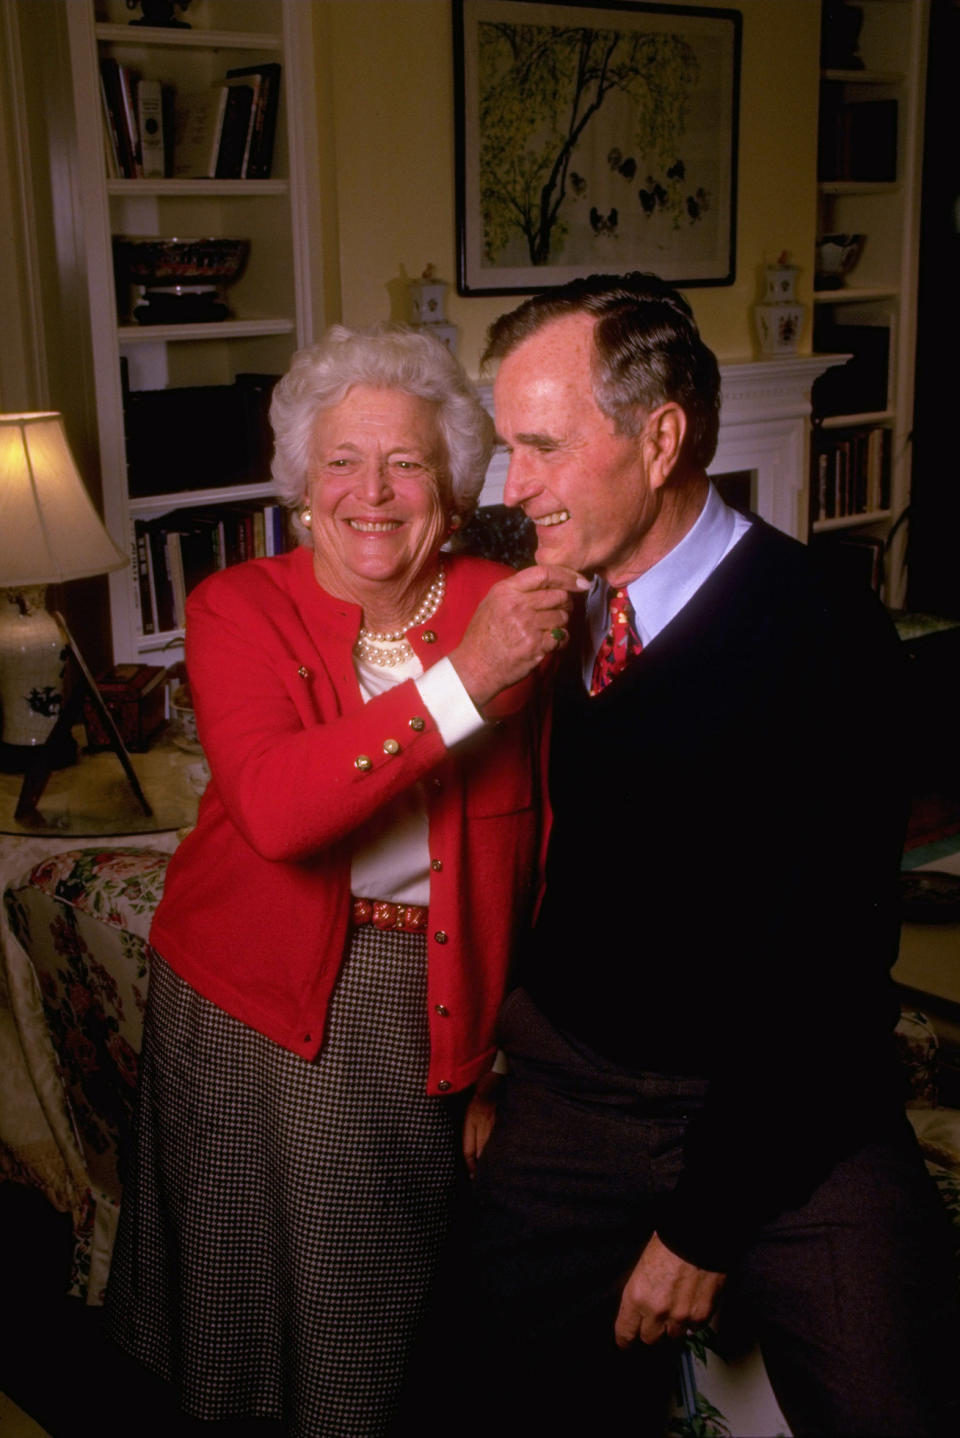 Former First Couple Barbara and George H.W. Bush enjoying life after presidency, in their living room at home in Houston, TX, 1994.